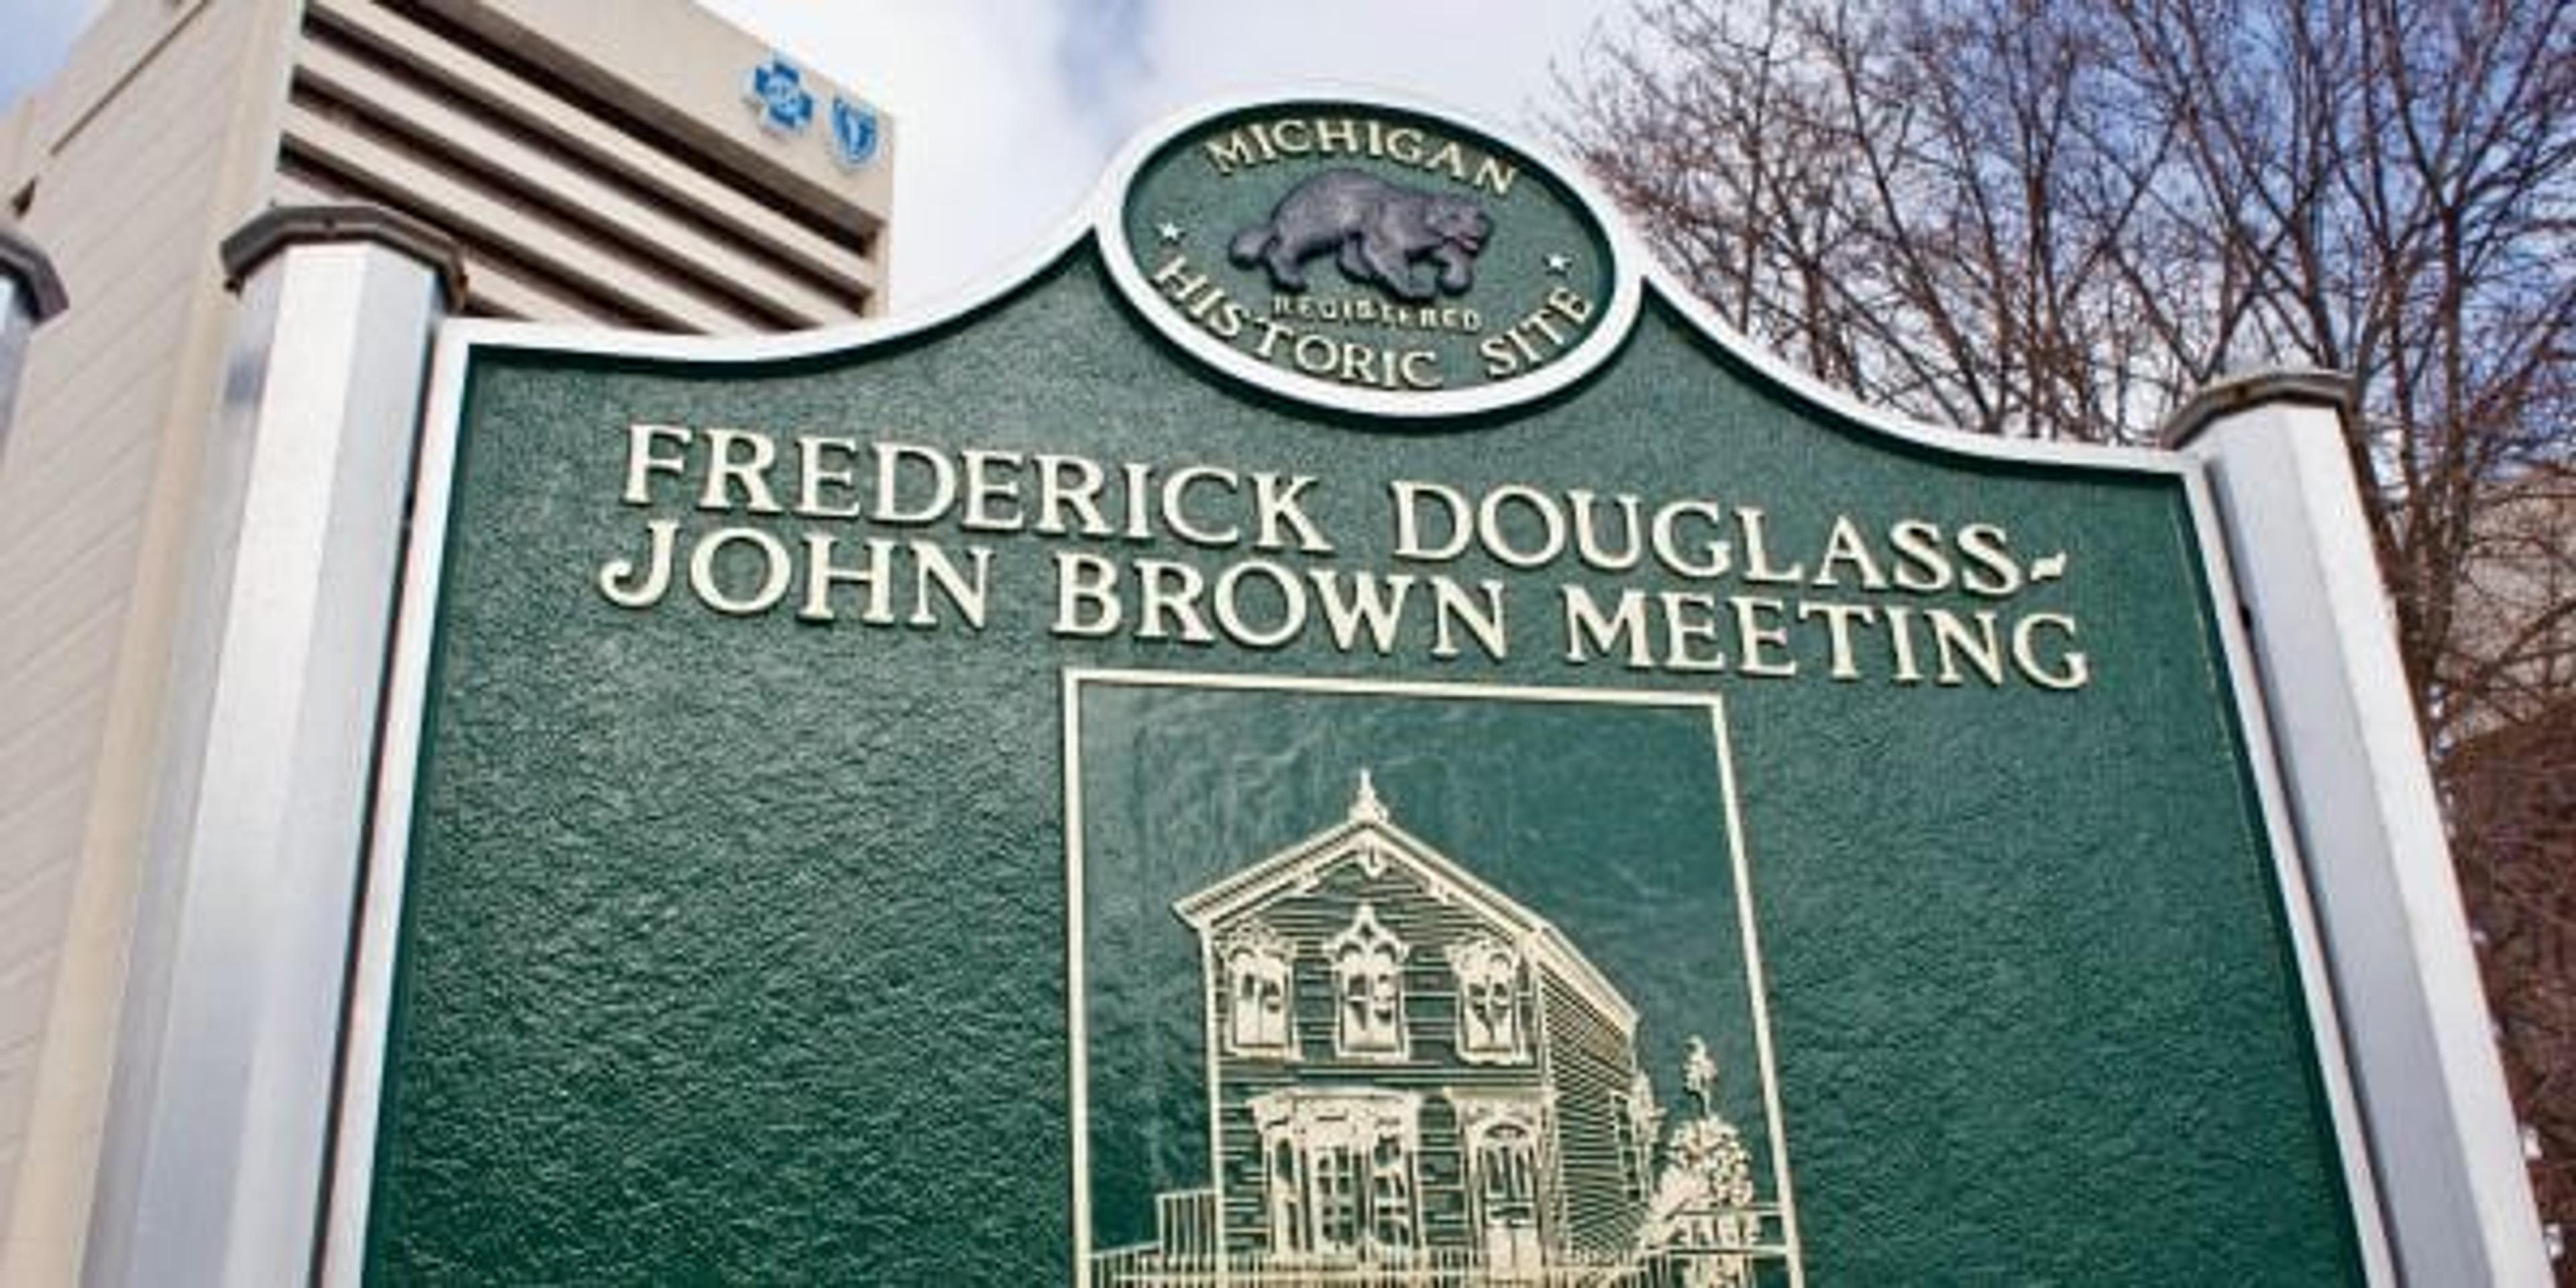 Image of the site in Detroit where abolitionist Frederick Douglass met John Brown.